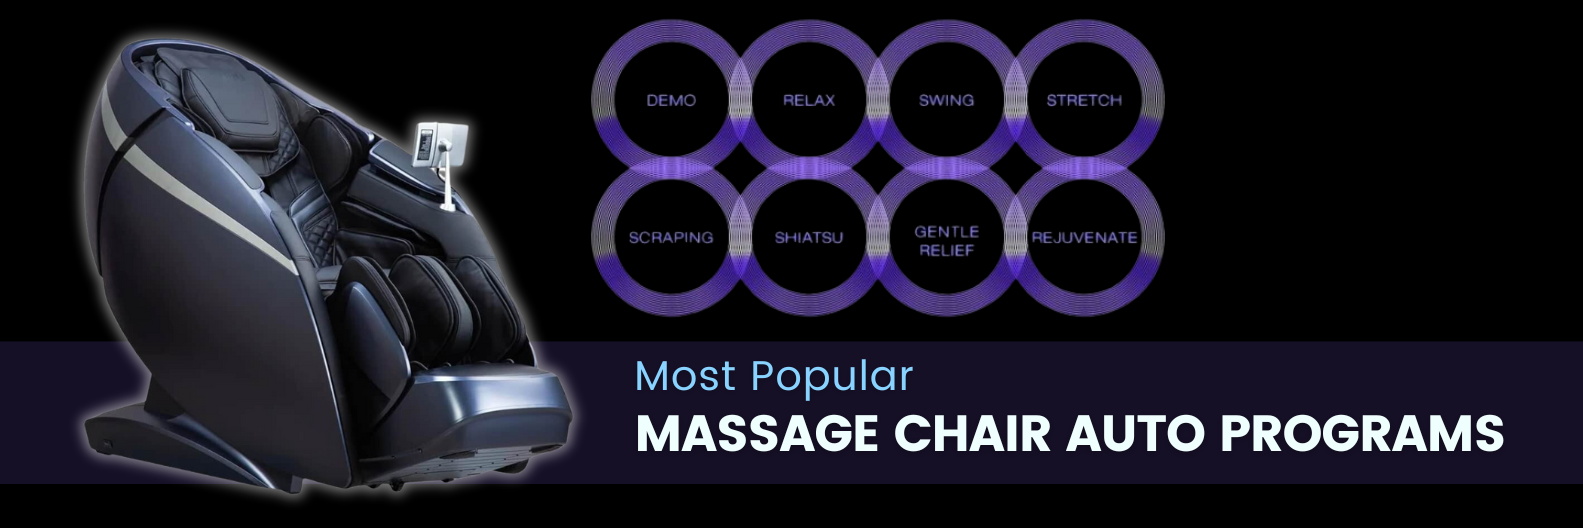 Explore popular massage chair programs and learn to optimize settings with helpful usage tips. Enhance your massage chair experience with our comprehensive English guides.